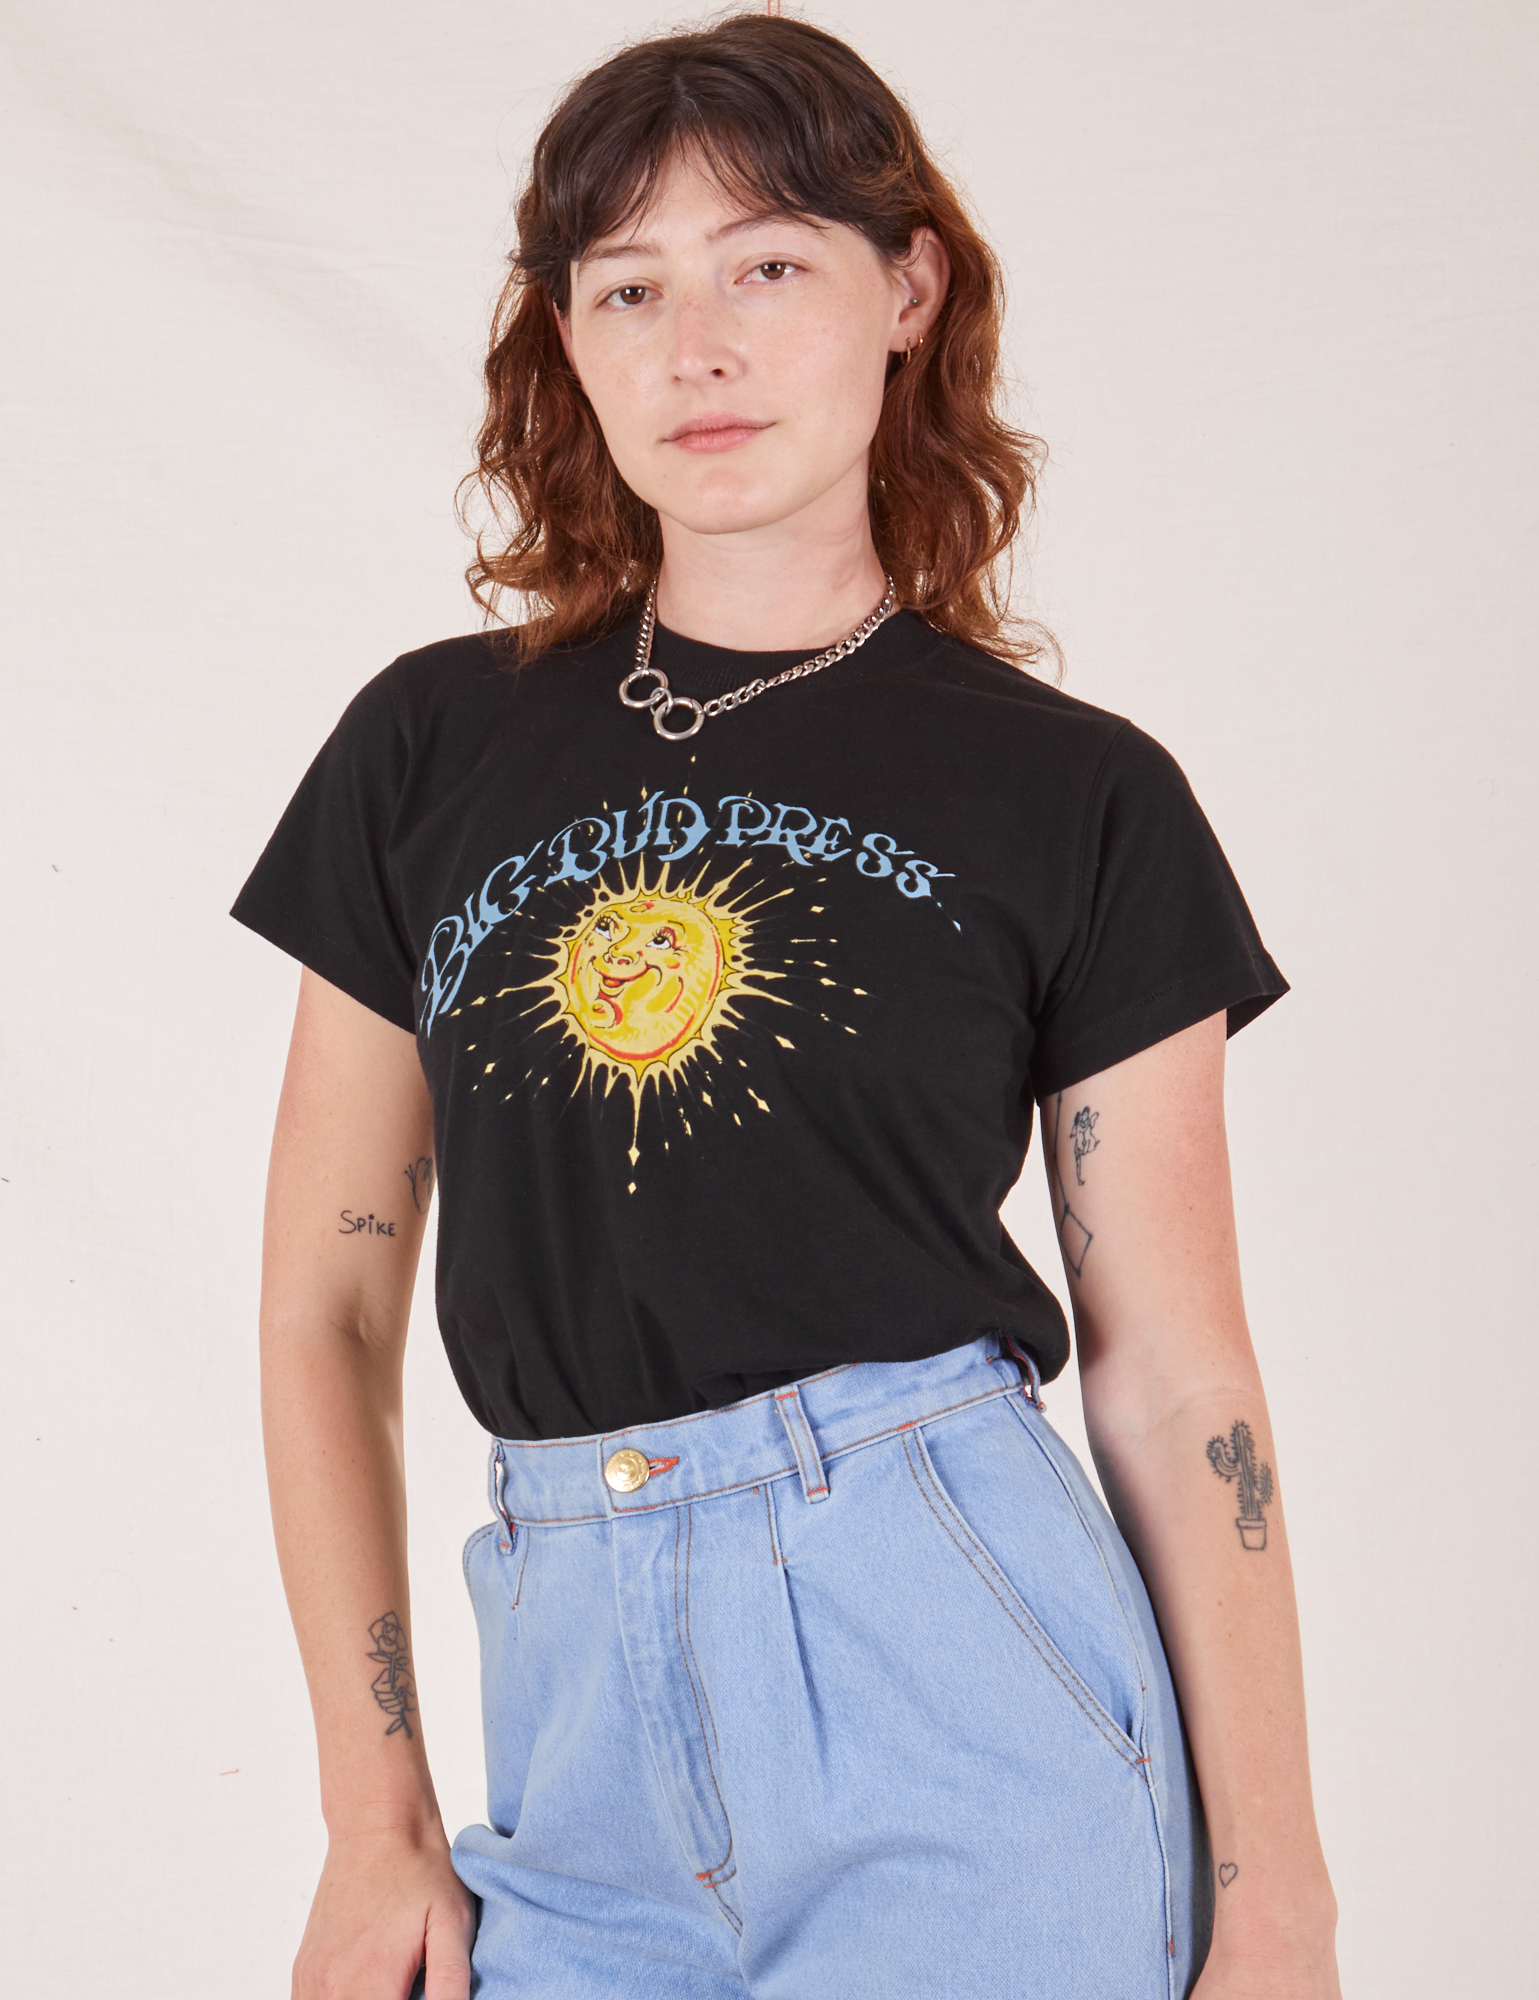 Alex is wearing Sun Baby Organic Tee in Basic Black tucked into light wash Trouser Jeans